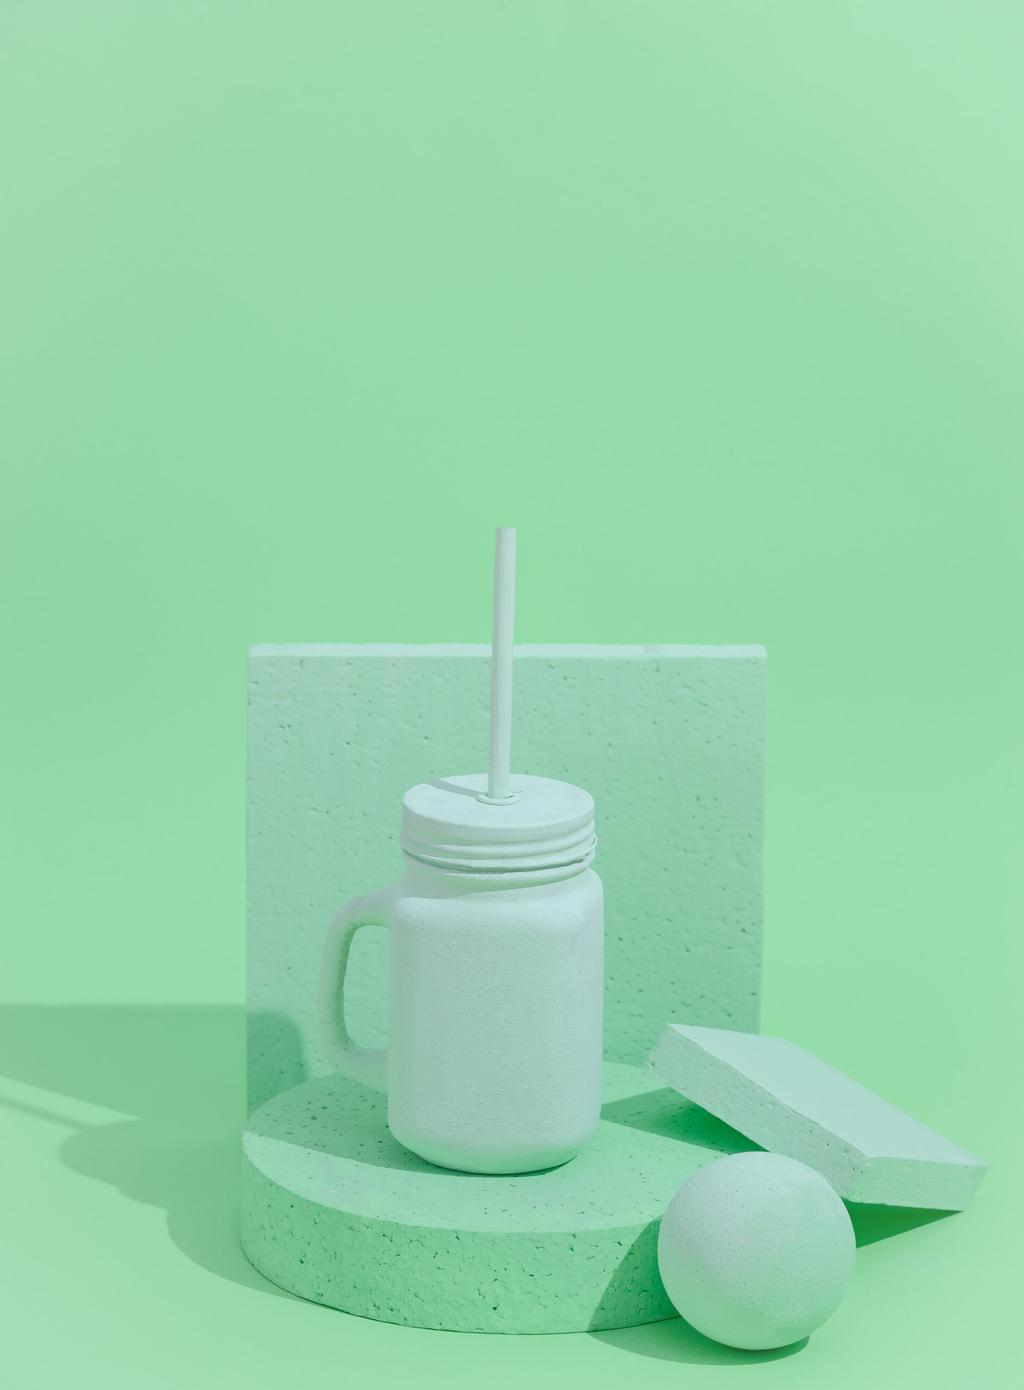 Minimal aesthetic still life monochrome design. Aqua Menthe trends.  Smoothie mug and abstraction